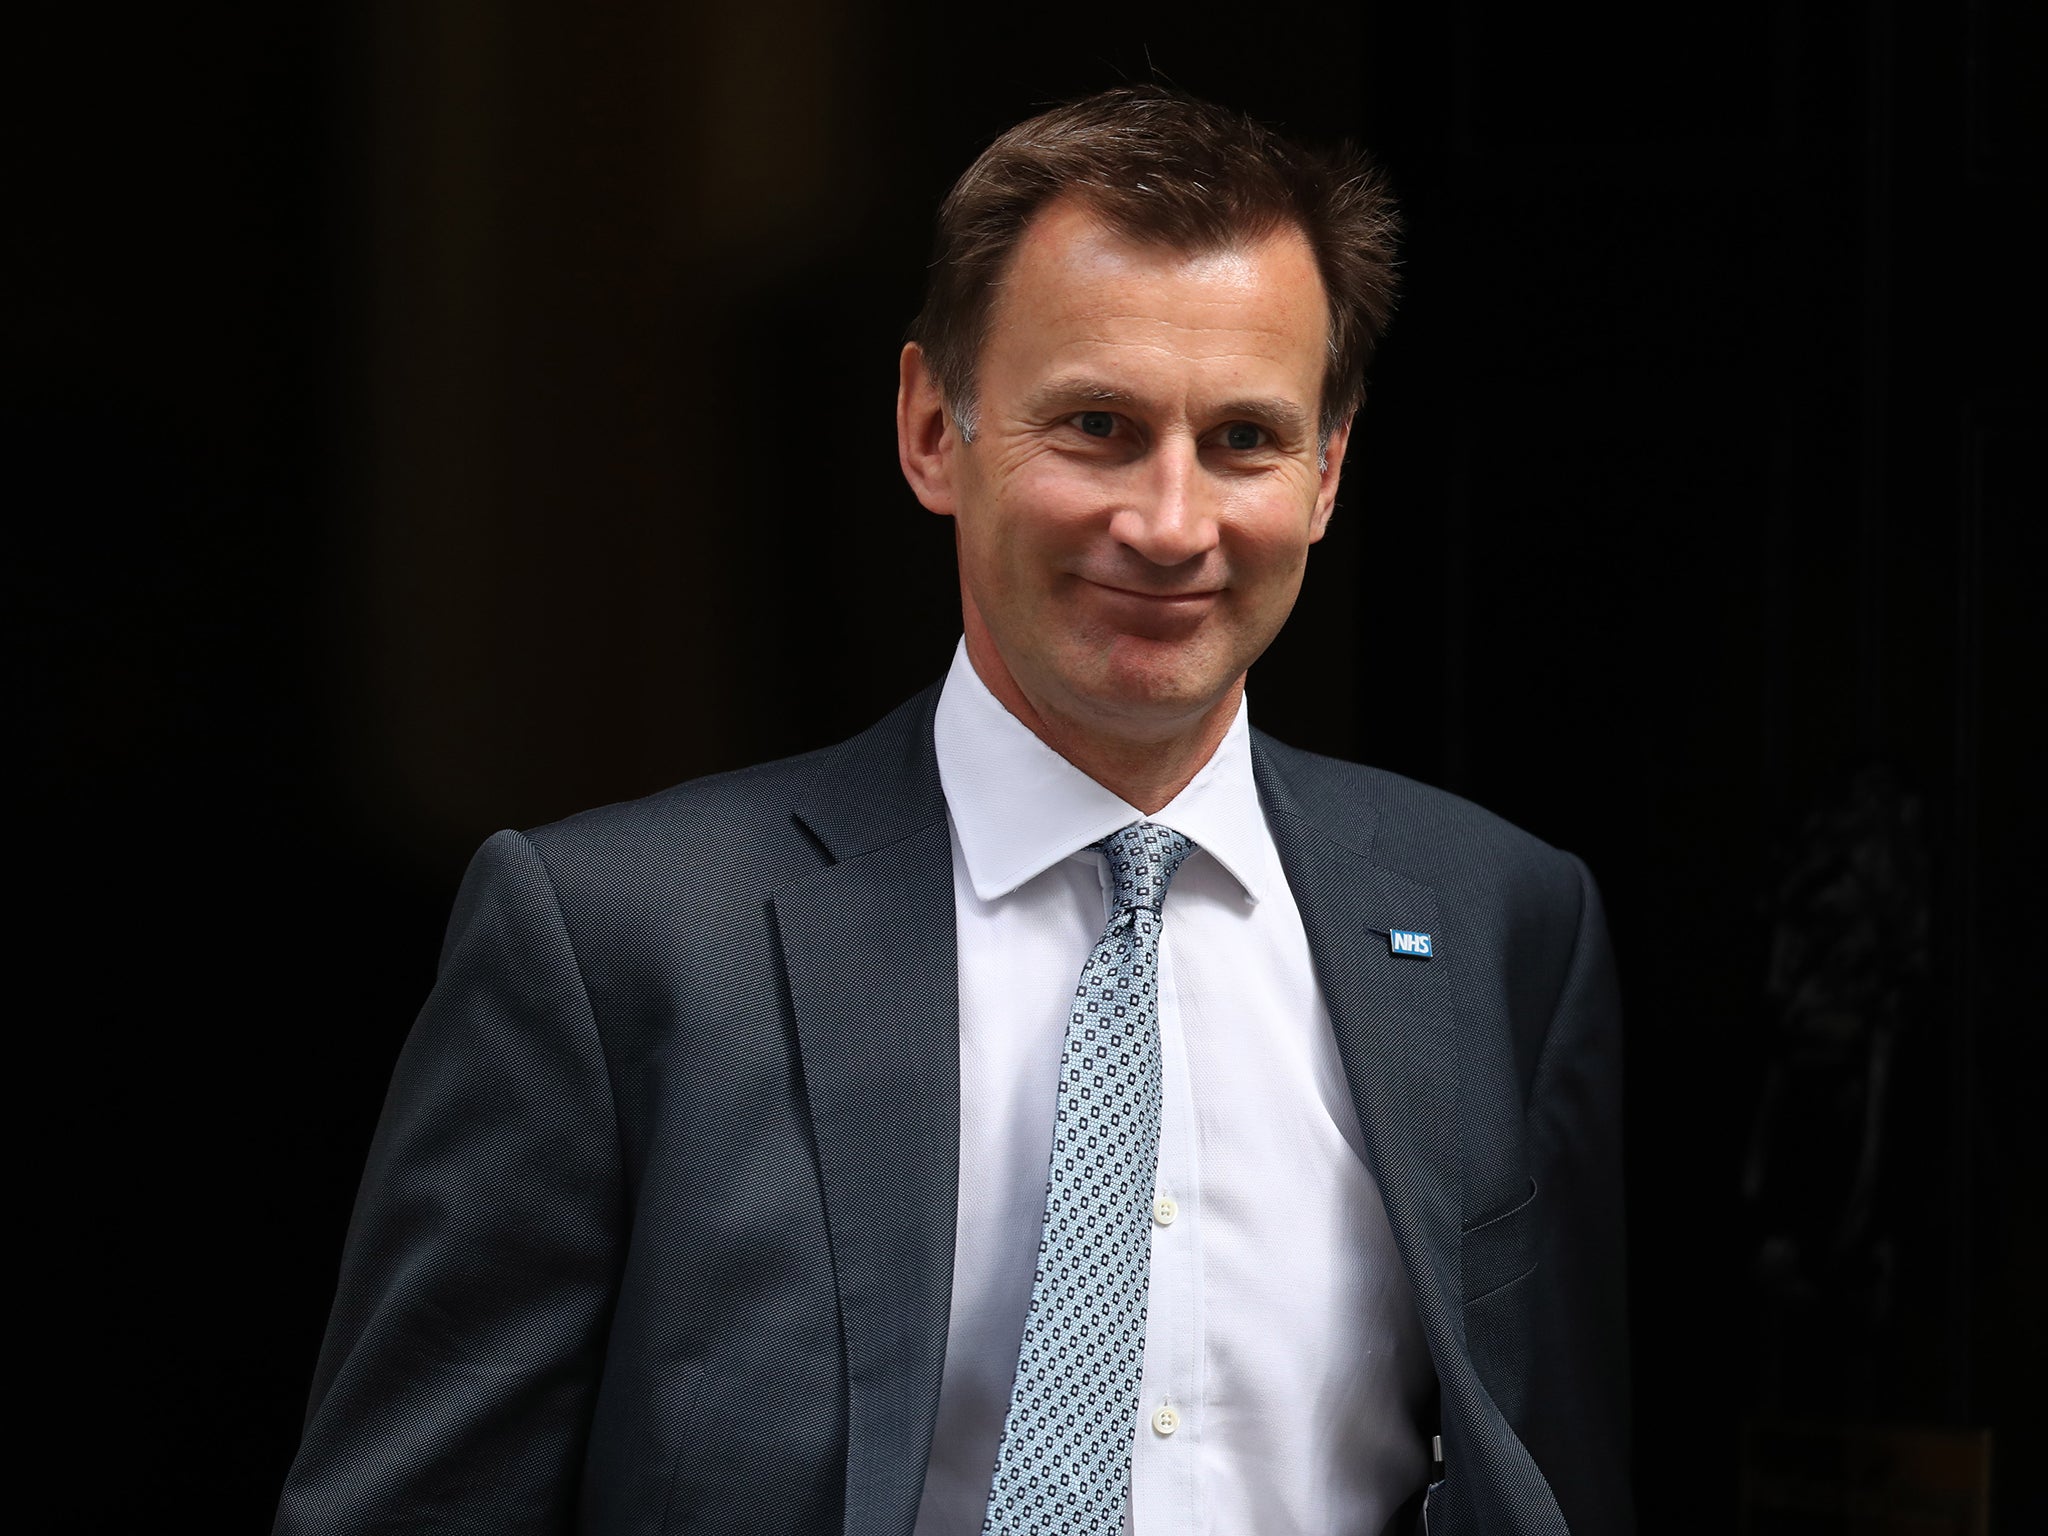 The Health Secretary Jeremy Hunt, however, has poor personal ratings – a likely reflection of his prolonged battle with the junior doctors over a new contract, which led to historic strikes in the profession across the country